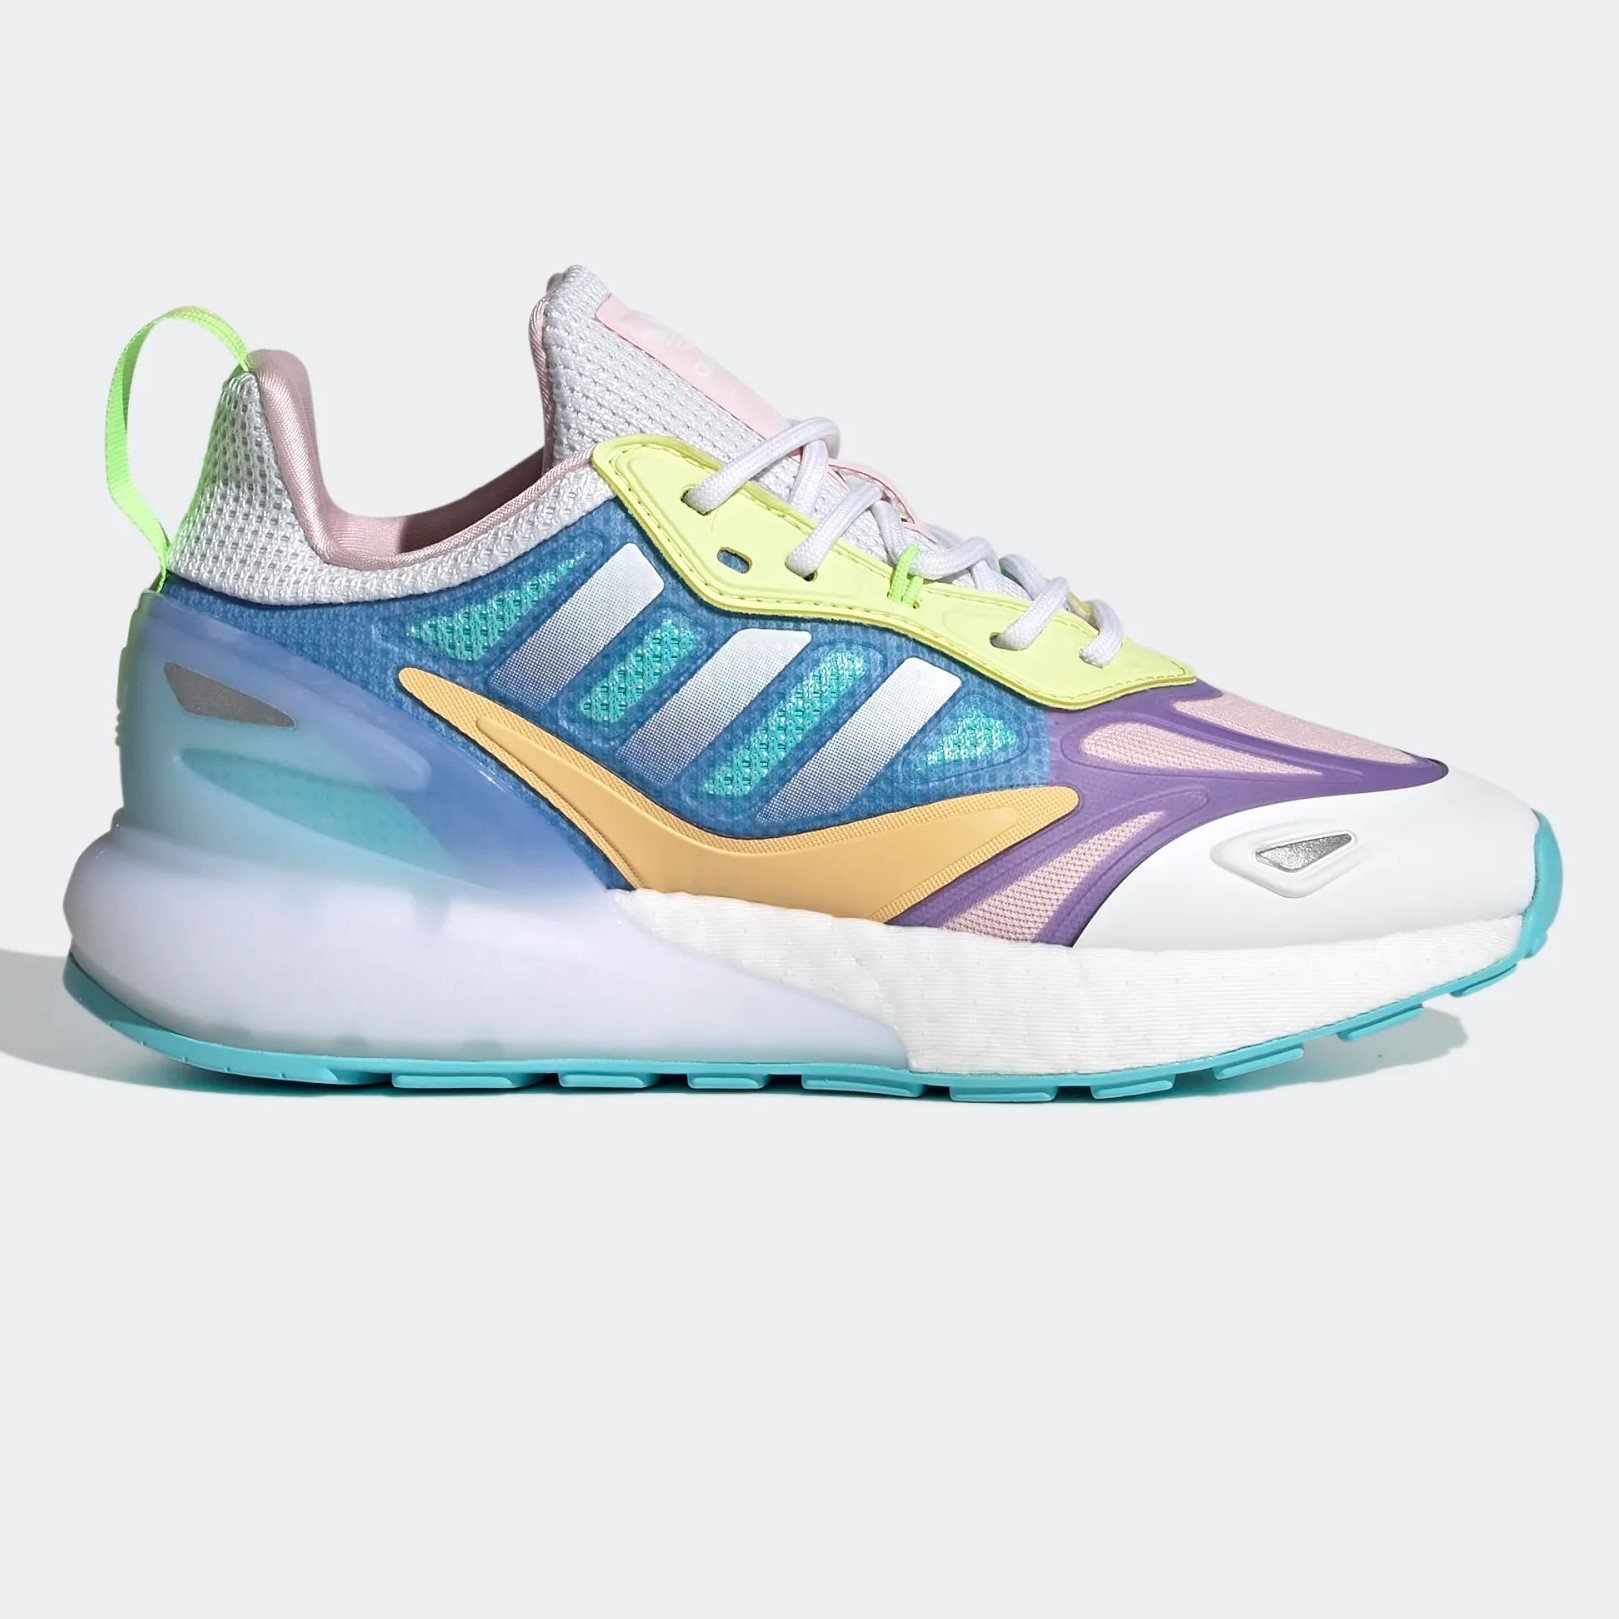 GIÀY THỂ THAO ADIDAS ZX 2K BOOST 2.0 9